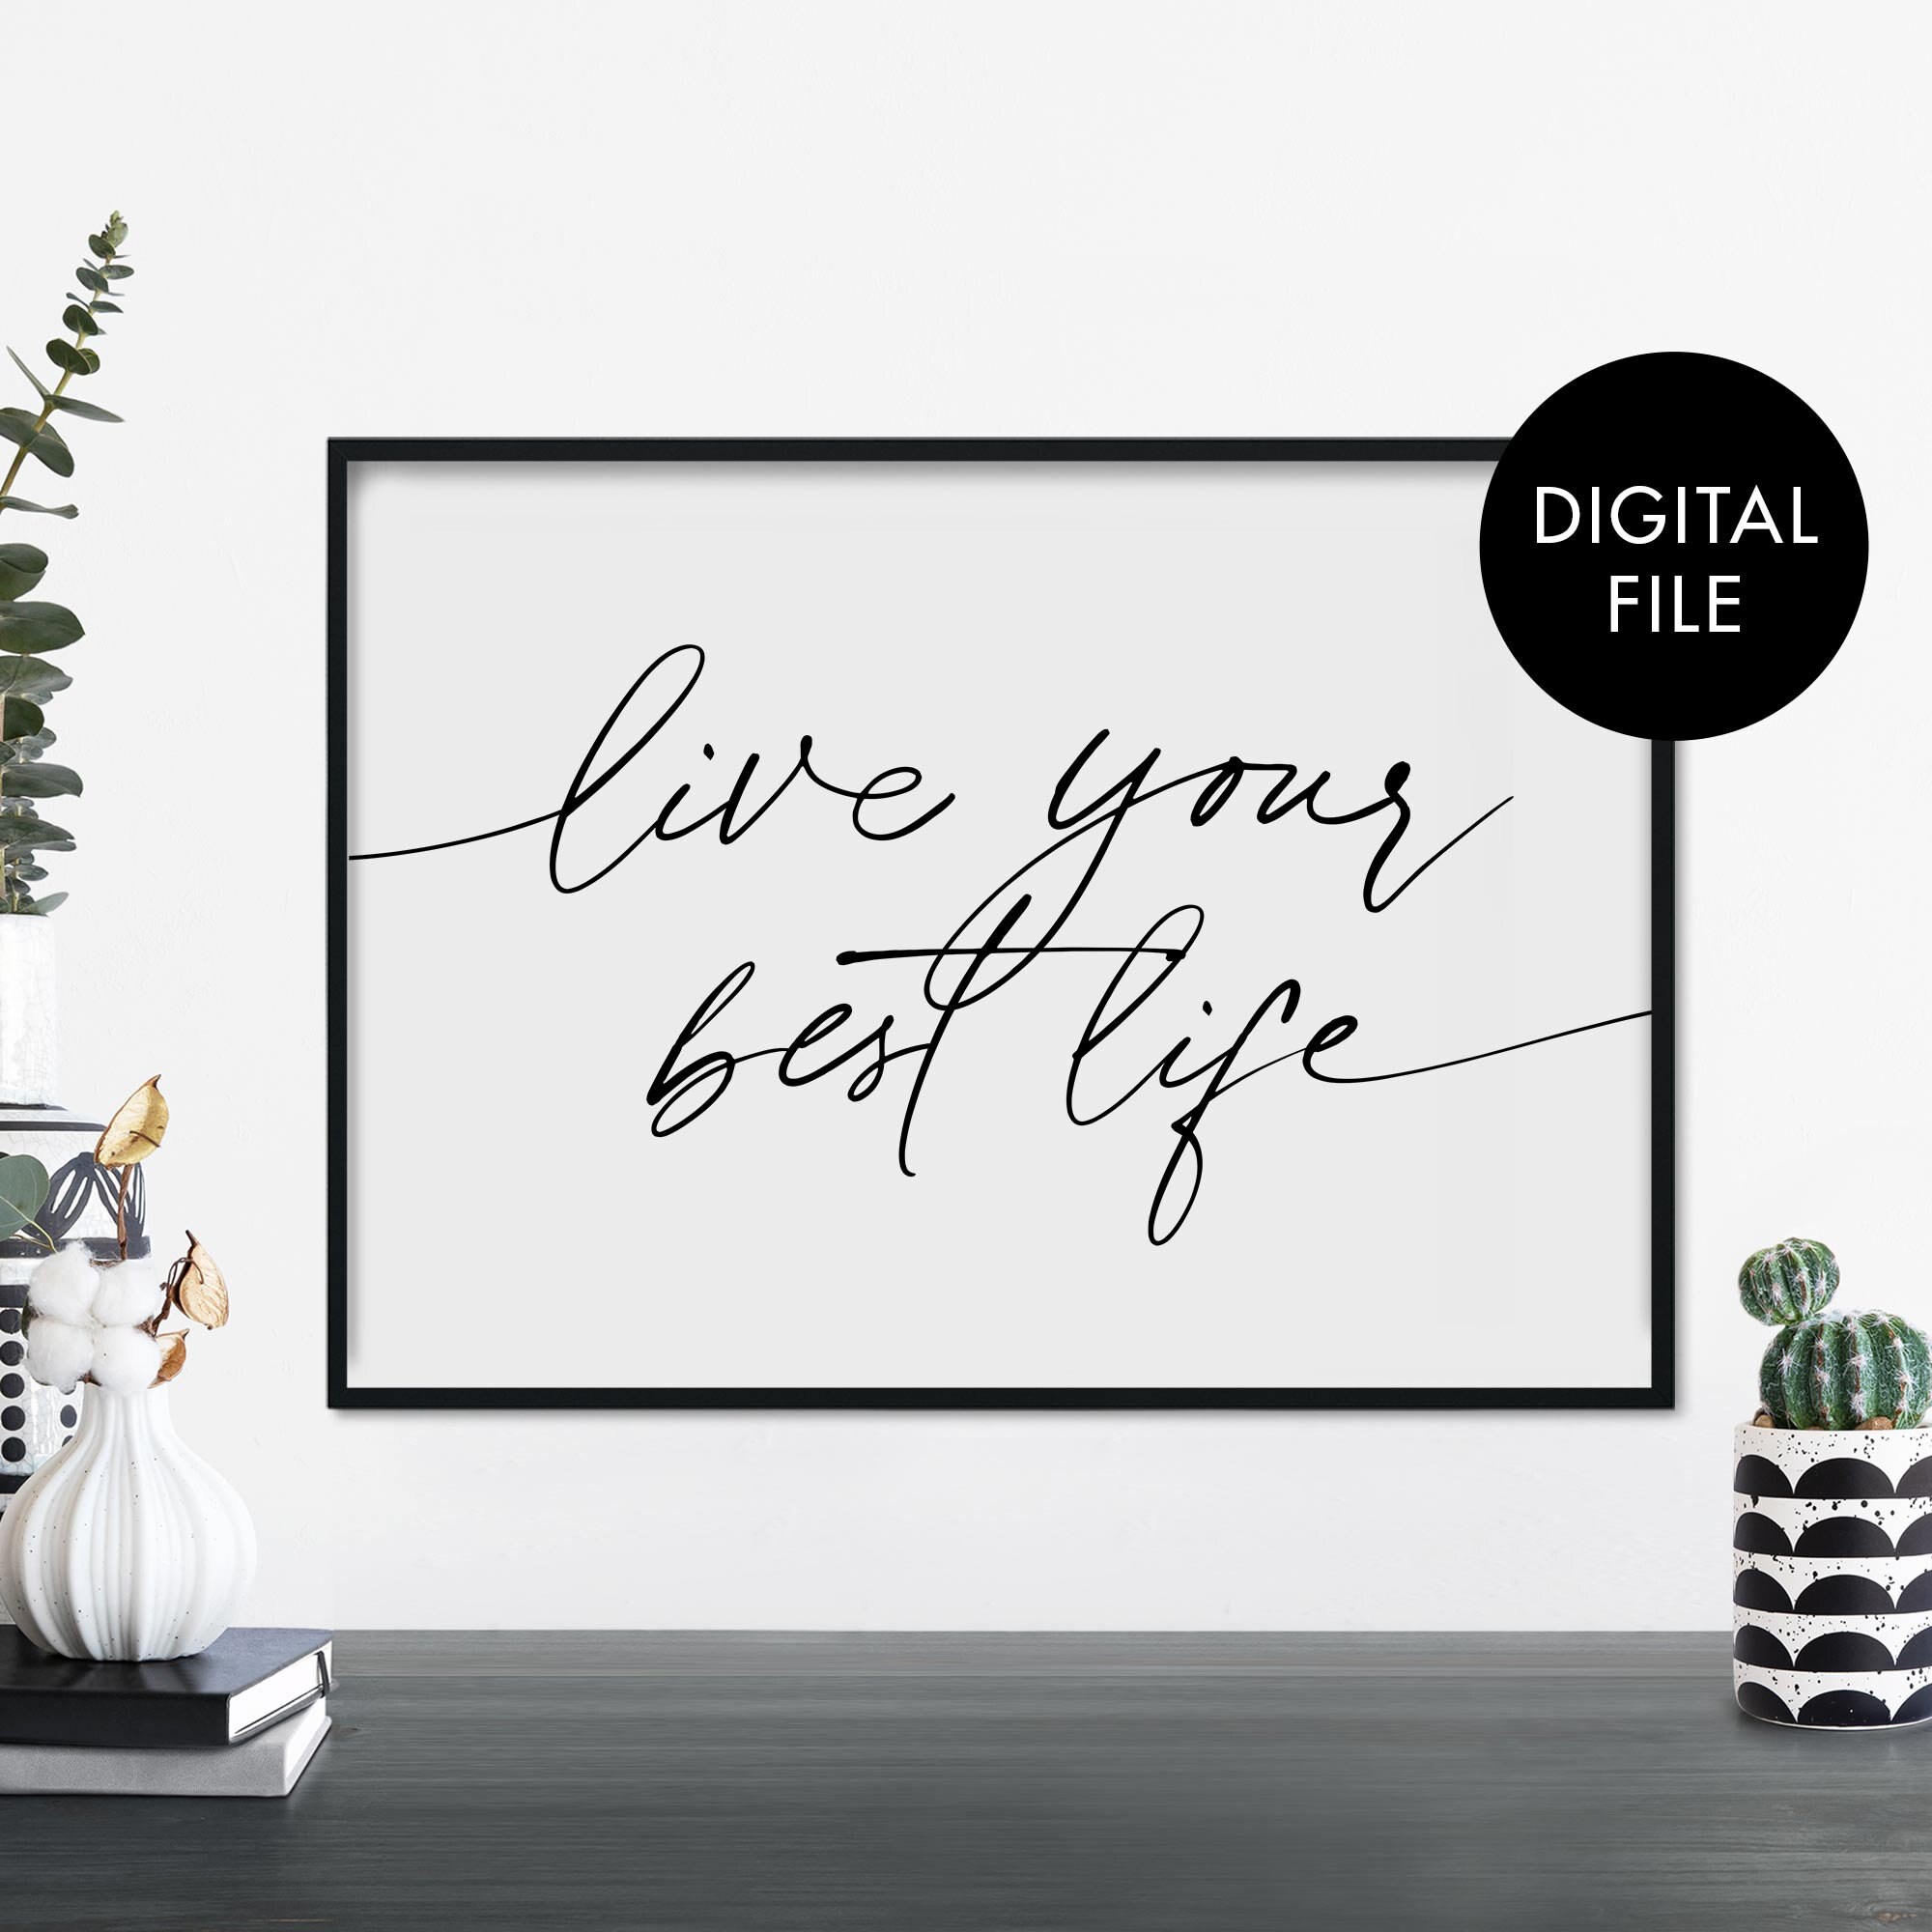 poster with text Love in cursive, black and white poster – desenio.com